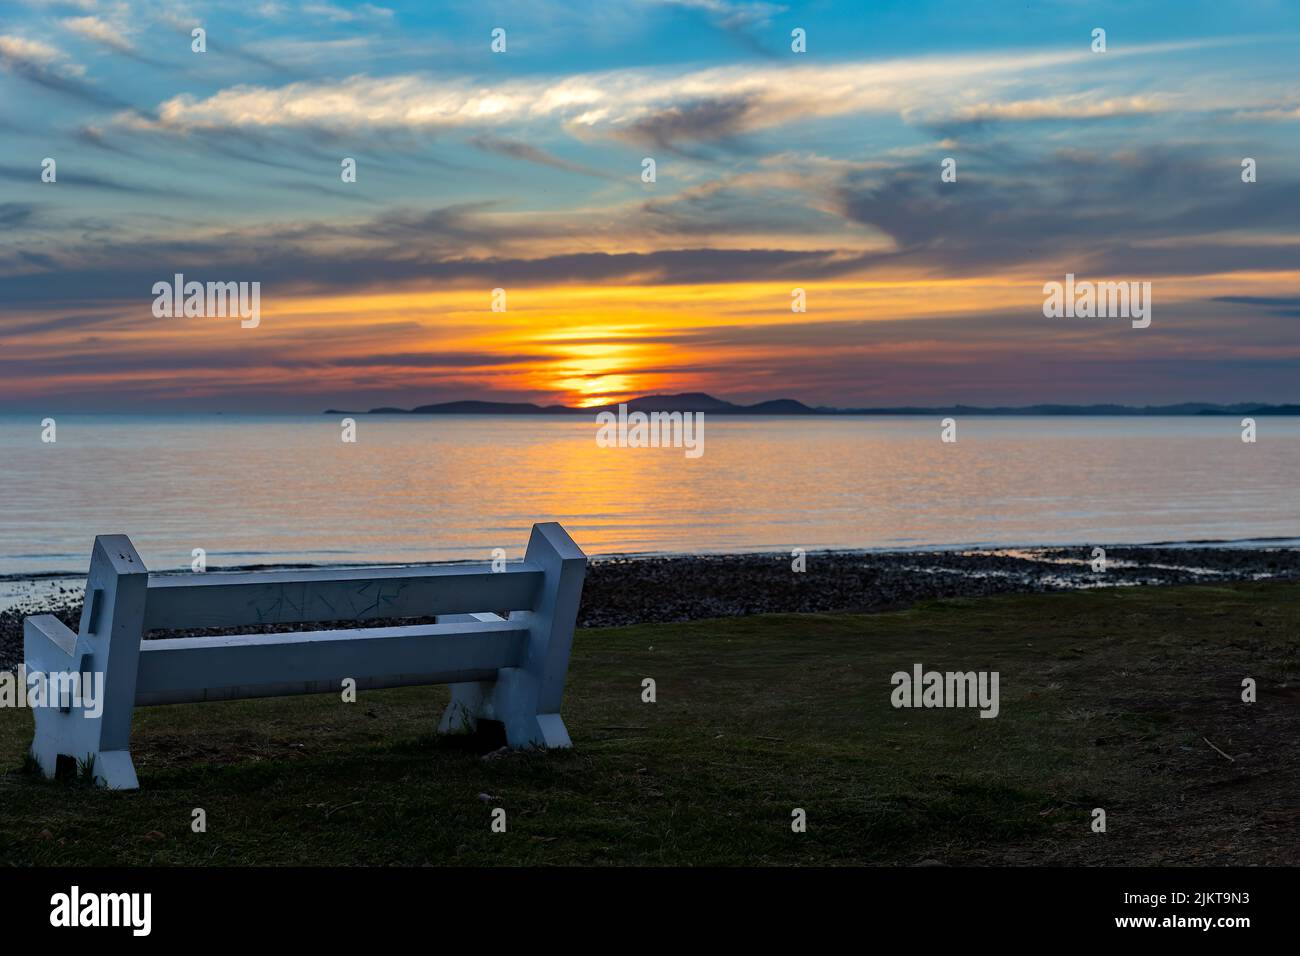 Reflection of sun at a bench with the offshore Sainte Marie island at sunset, view from Plum, New caledonia Stock Photo